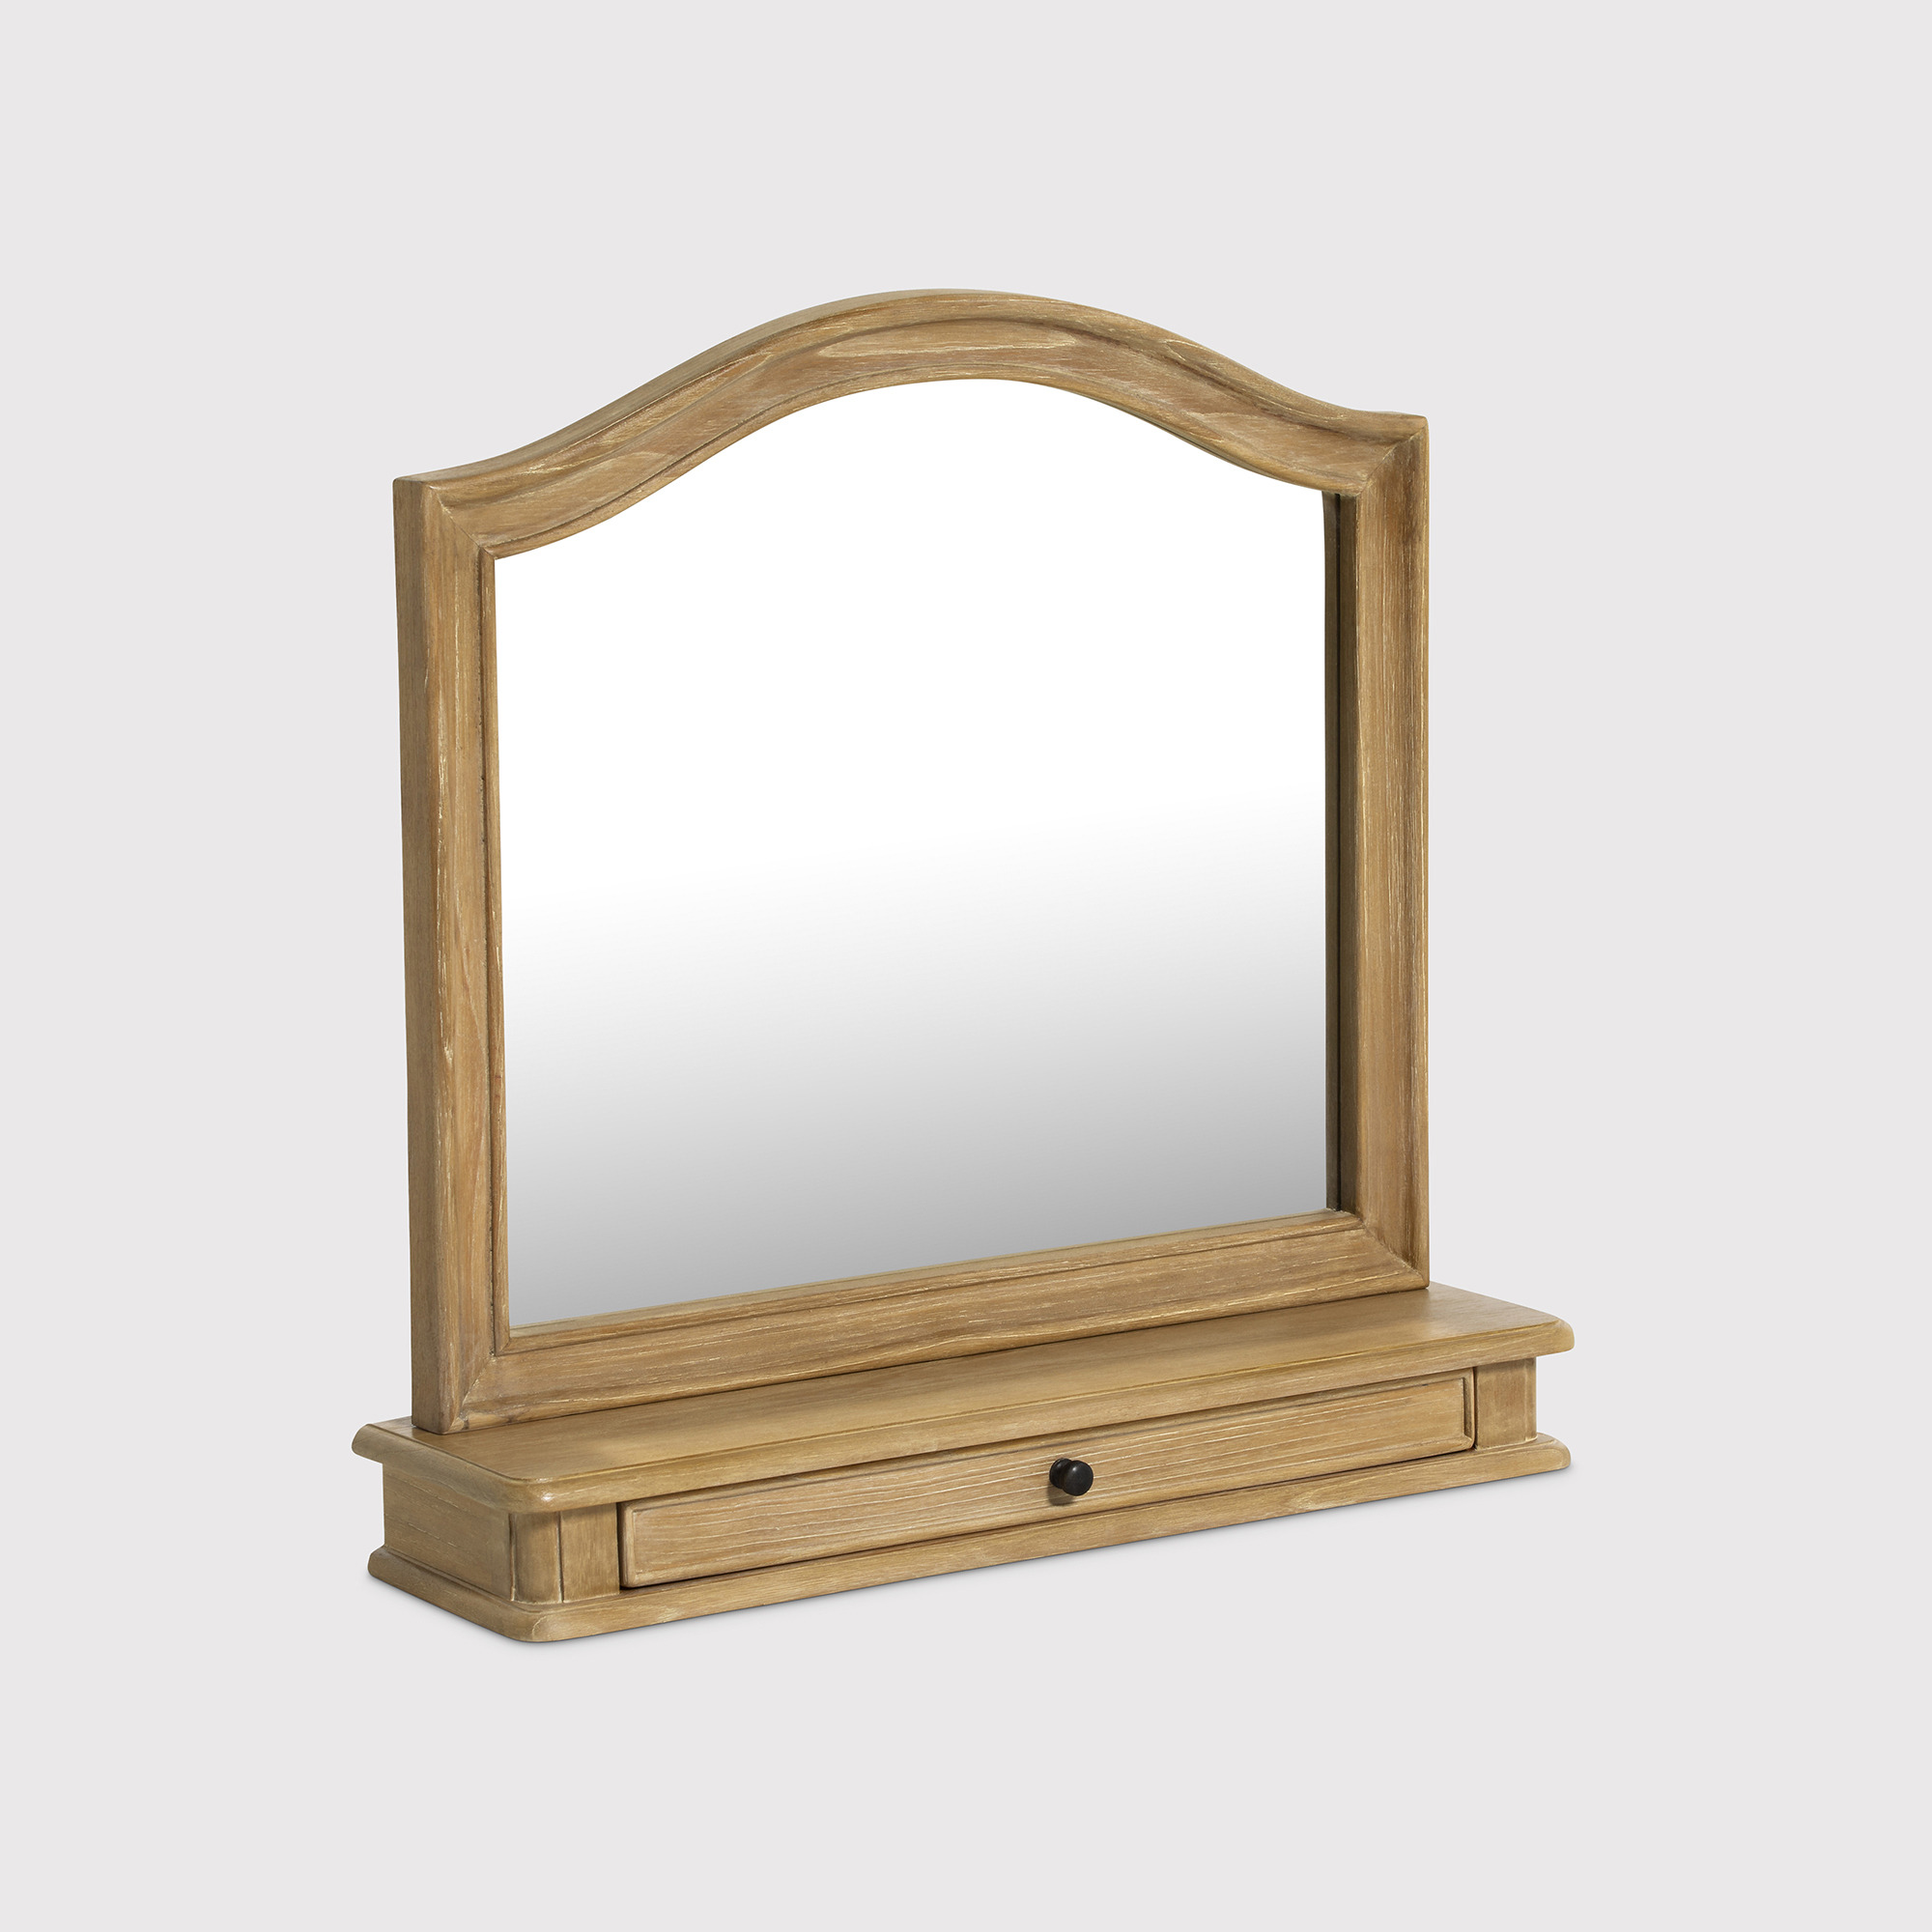 Cecile Gallery Mirror, Square, Neutral Wood - Barker & Stonehouse - image 1